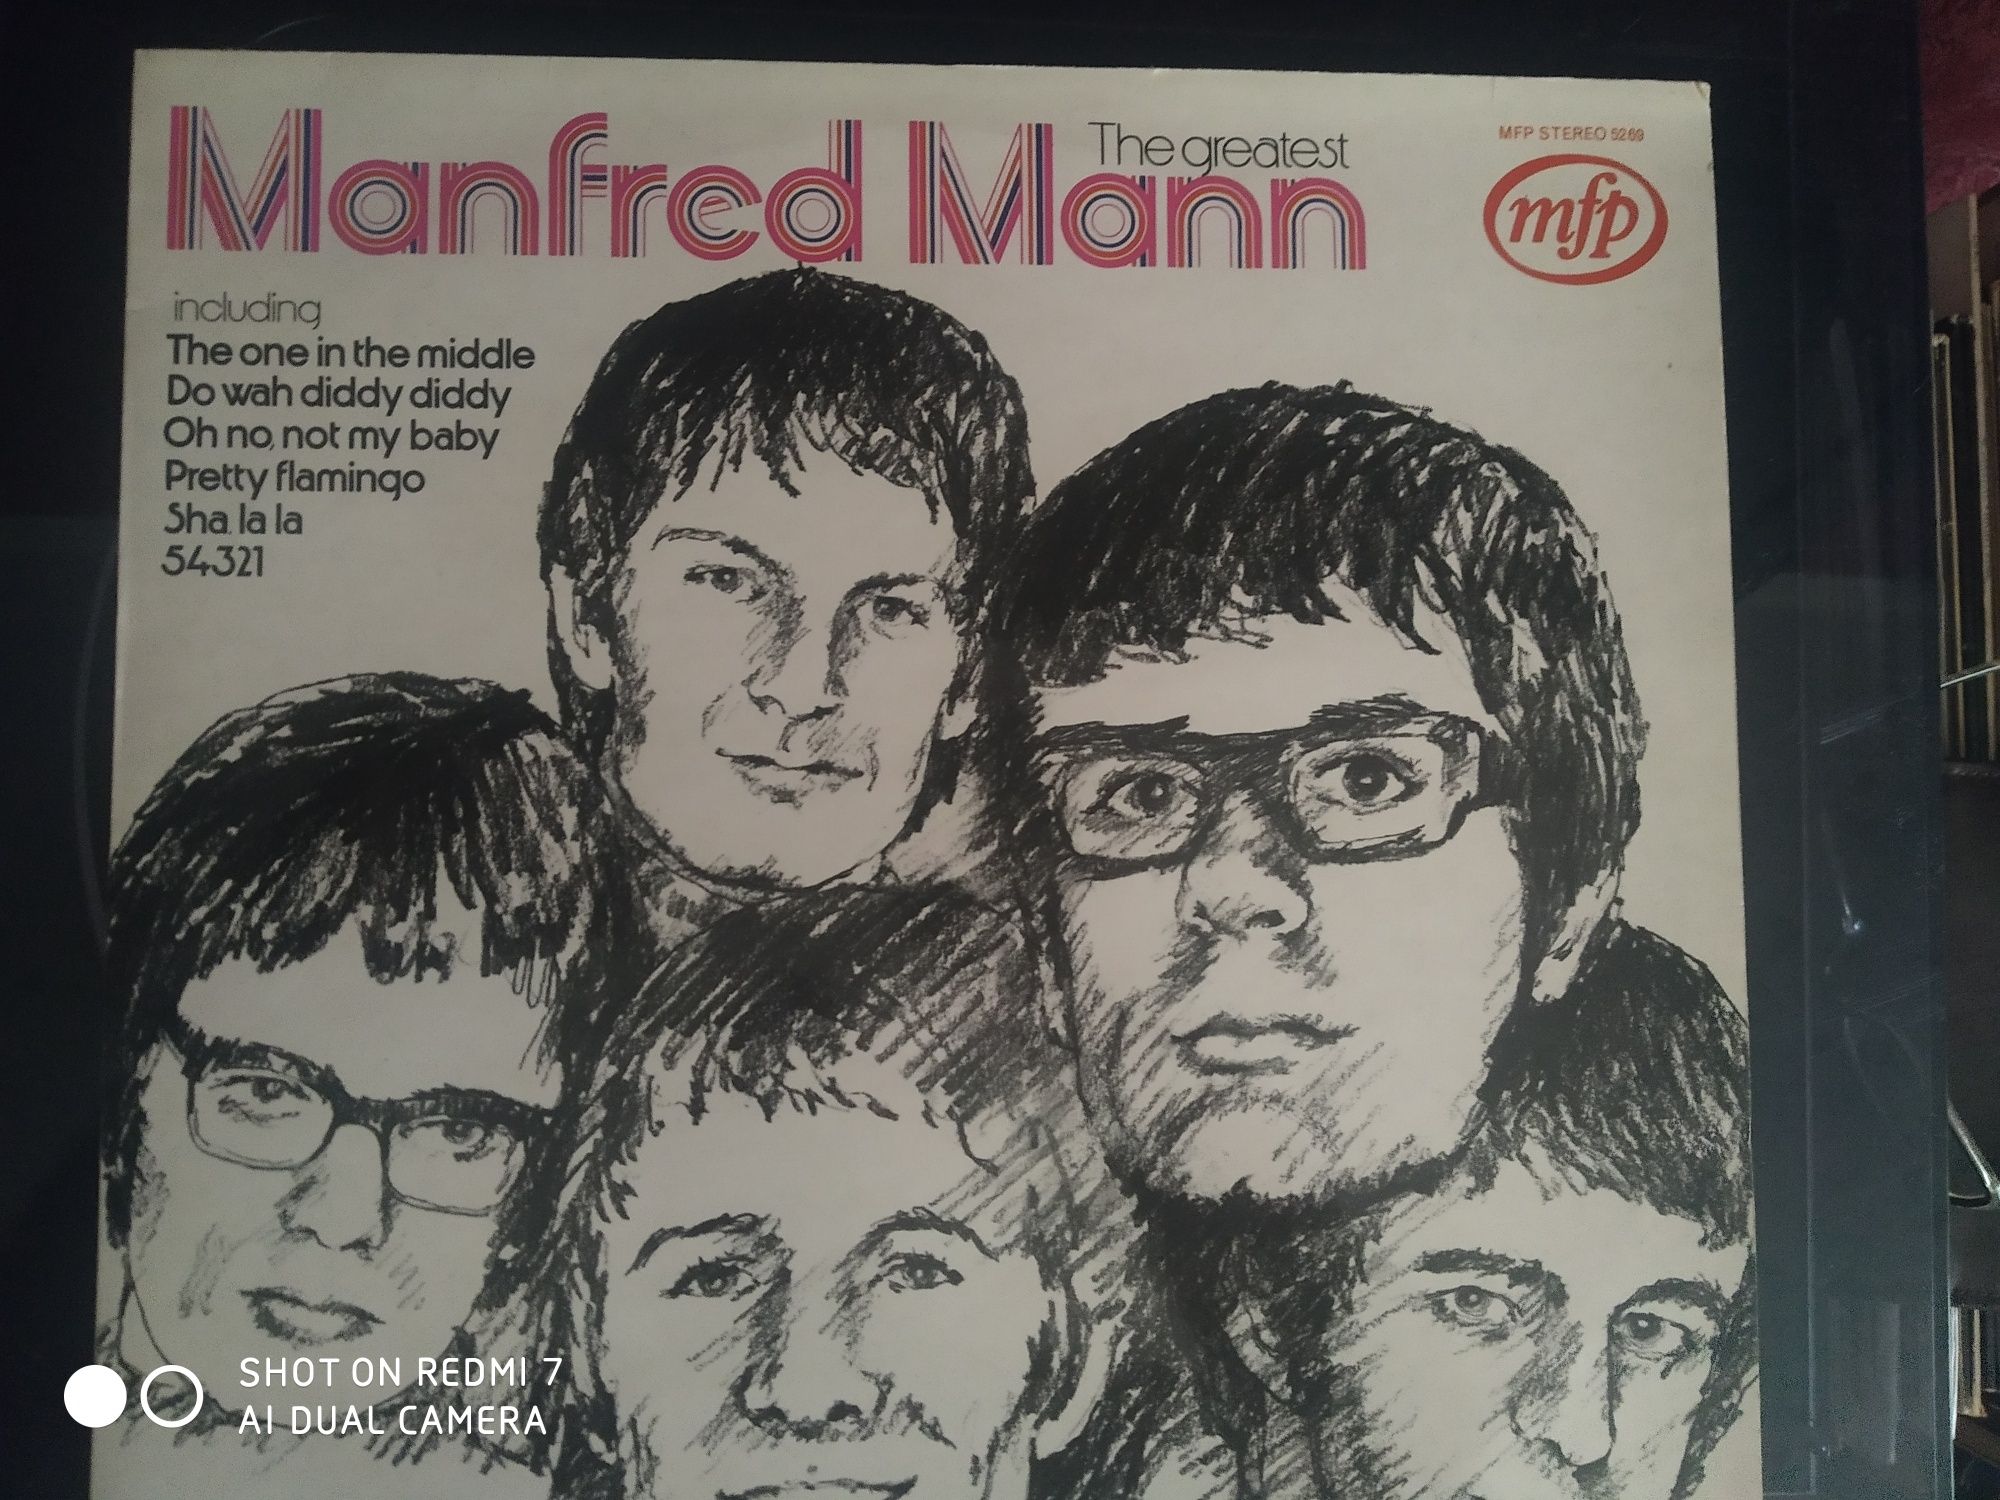 Manfred Mann – The Greatest